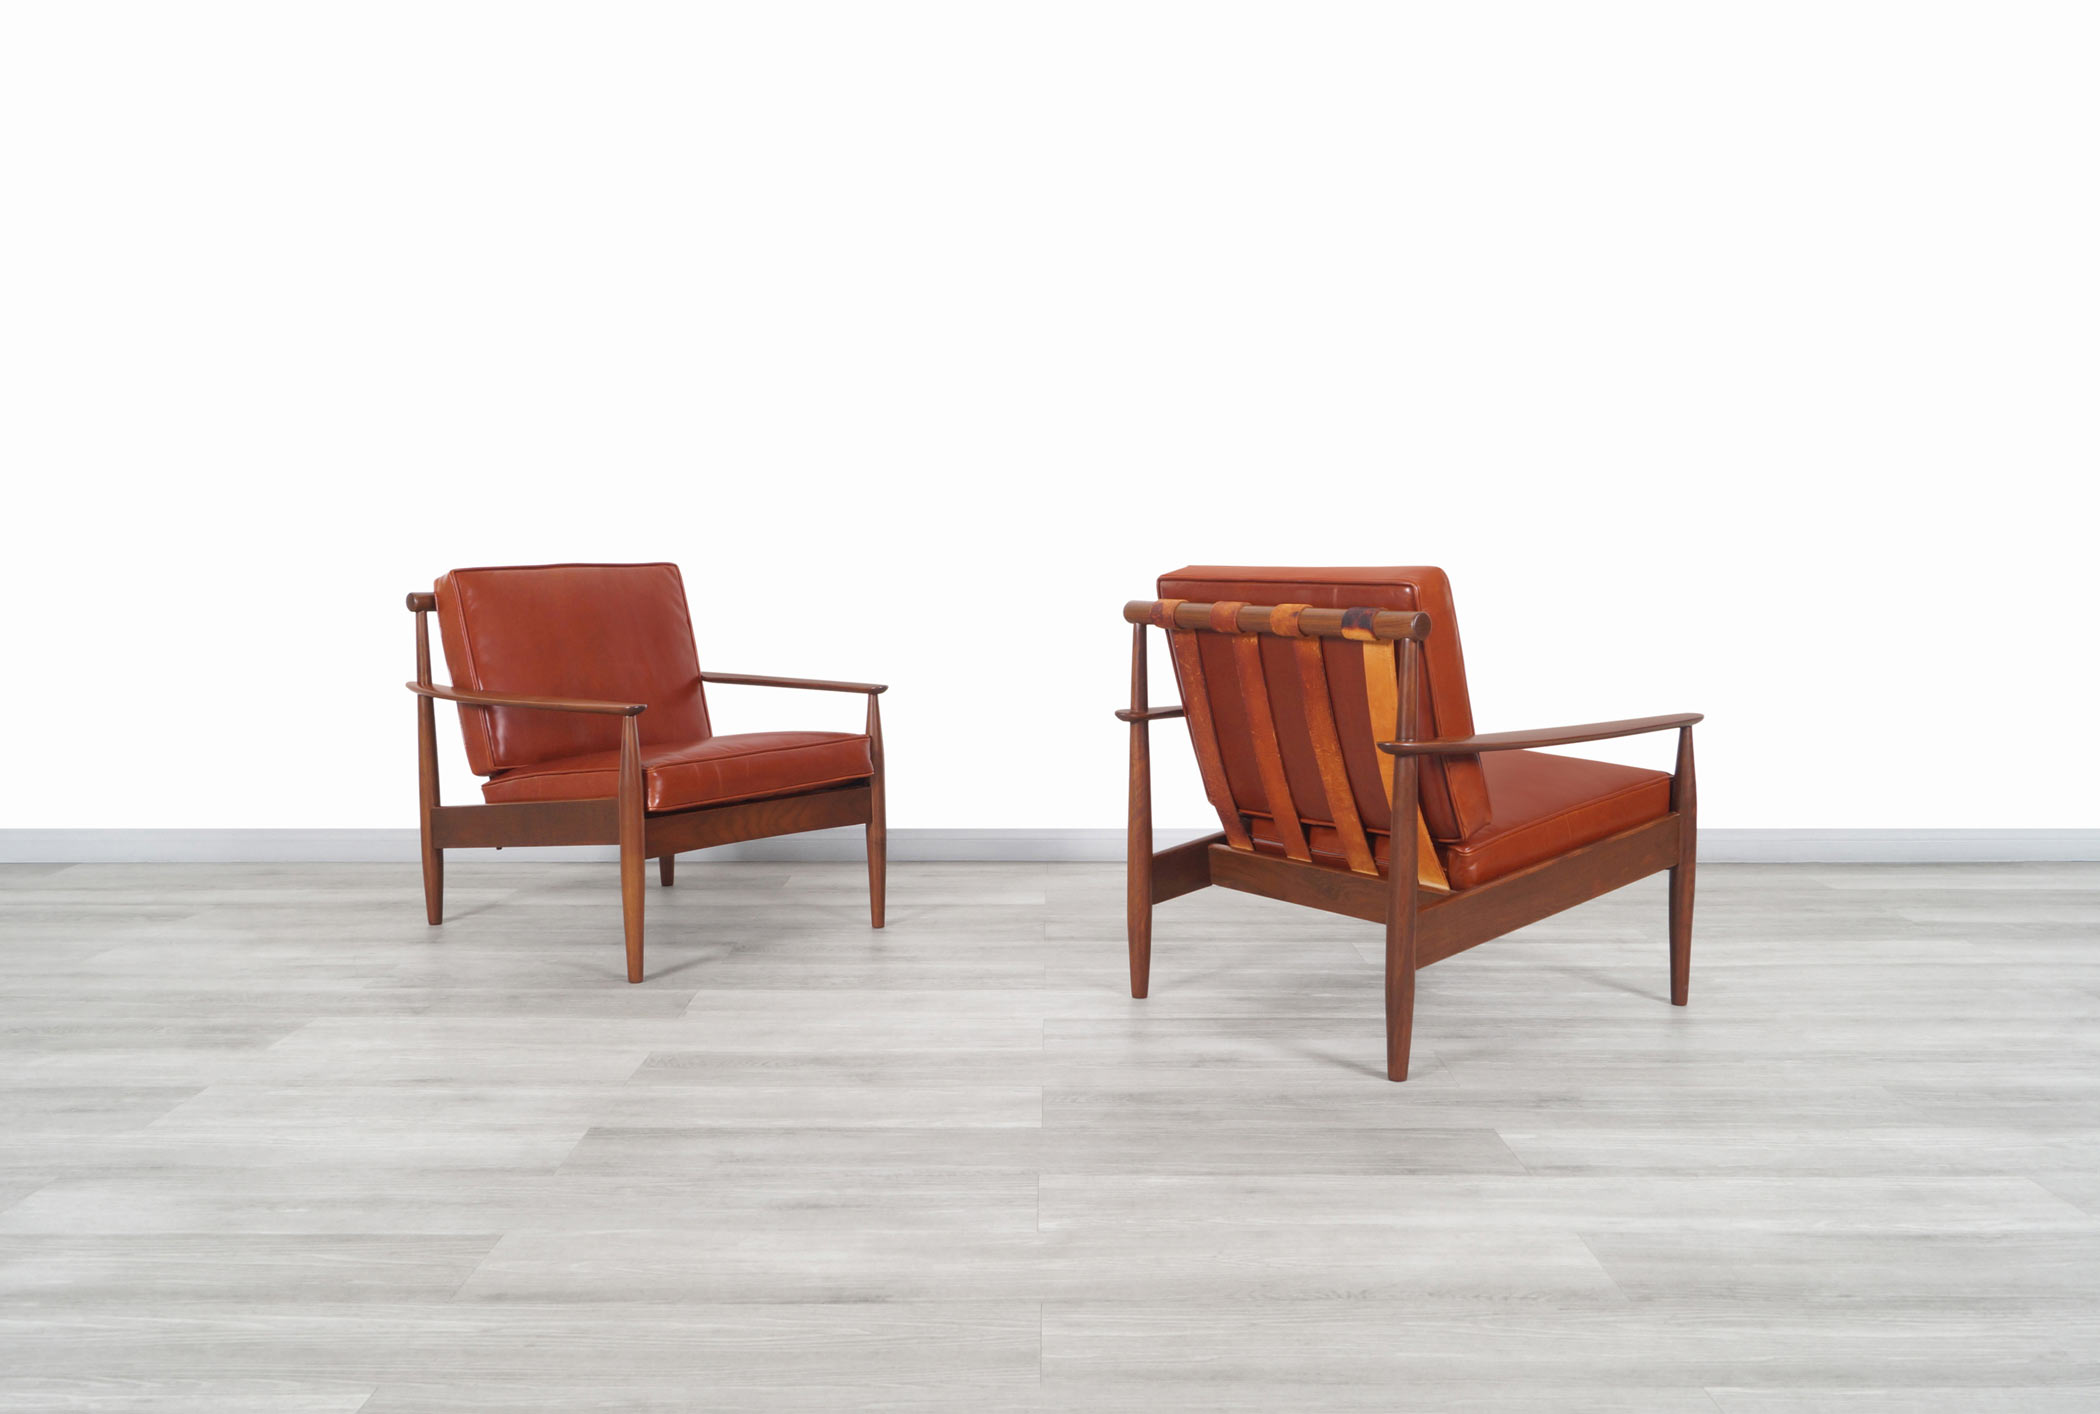 Danish Modern Leather and Walnut Lounge Chairs by Hans C. Andersen